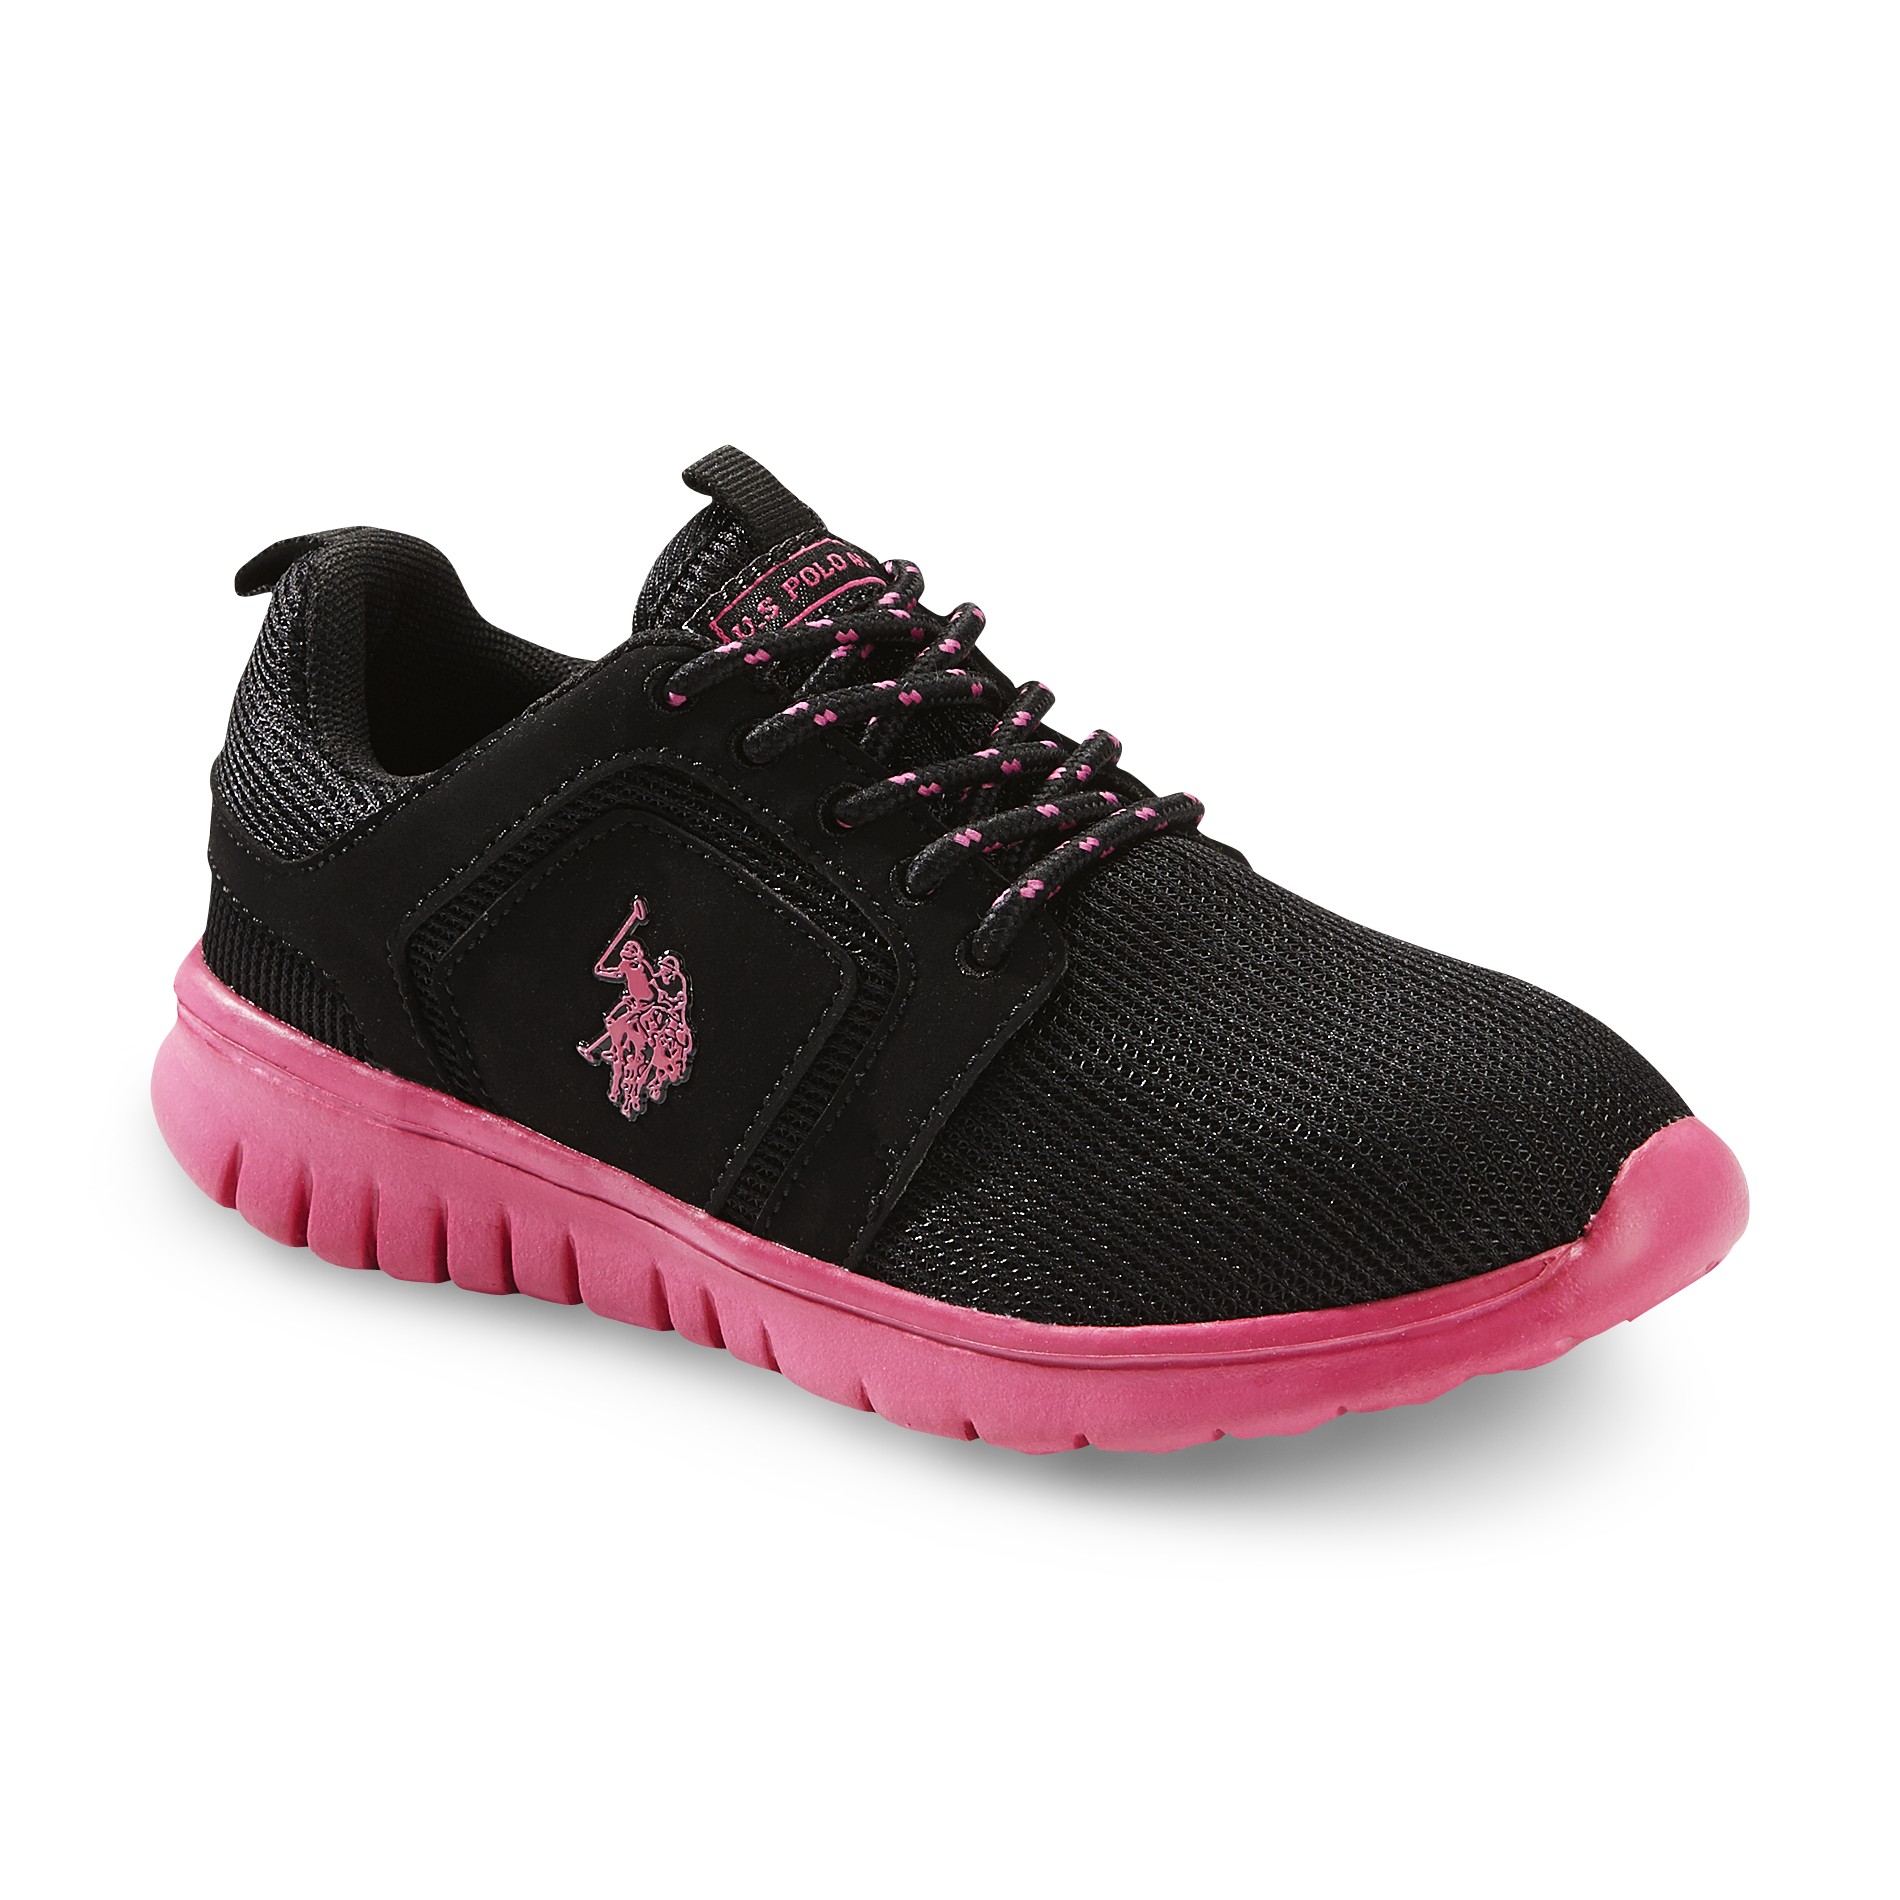 U.S. Polo Assn. Girl's Excel Casual Sneaker - Black/Pink - Shoes - Baby ...